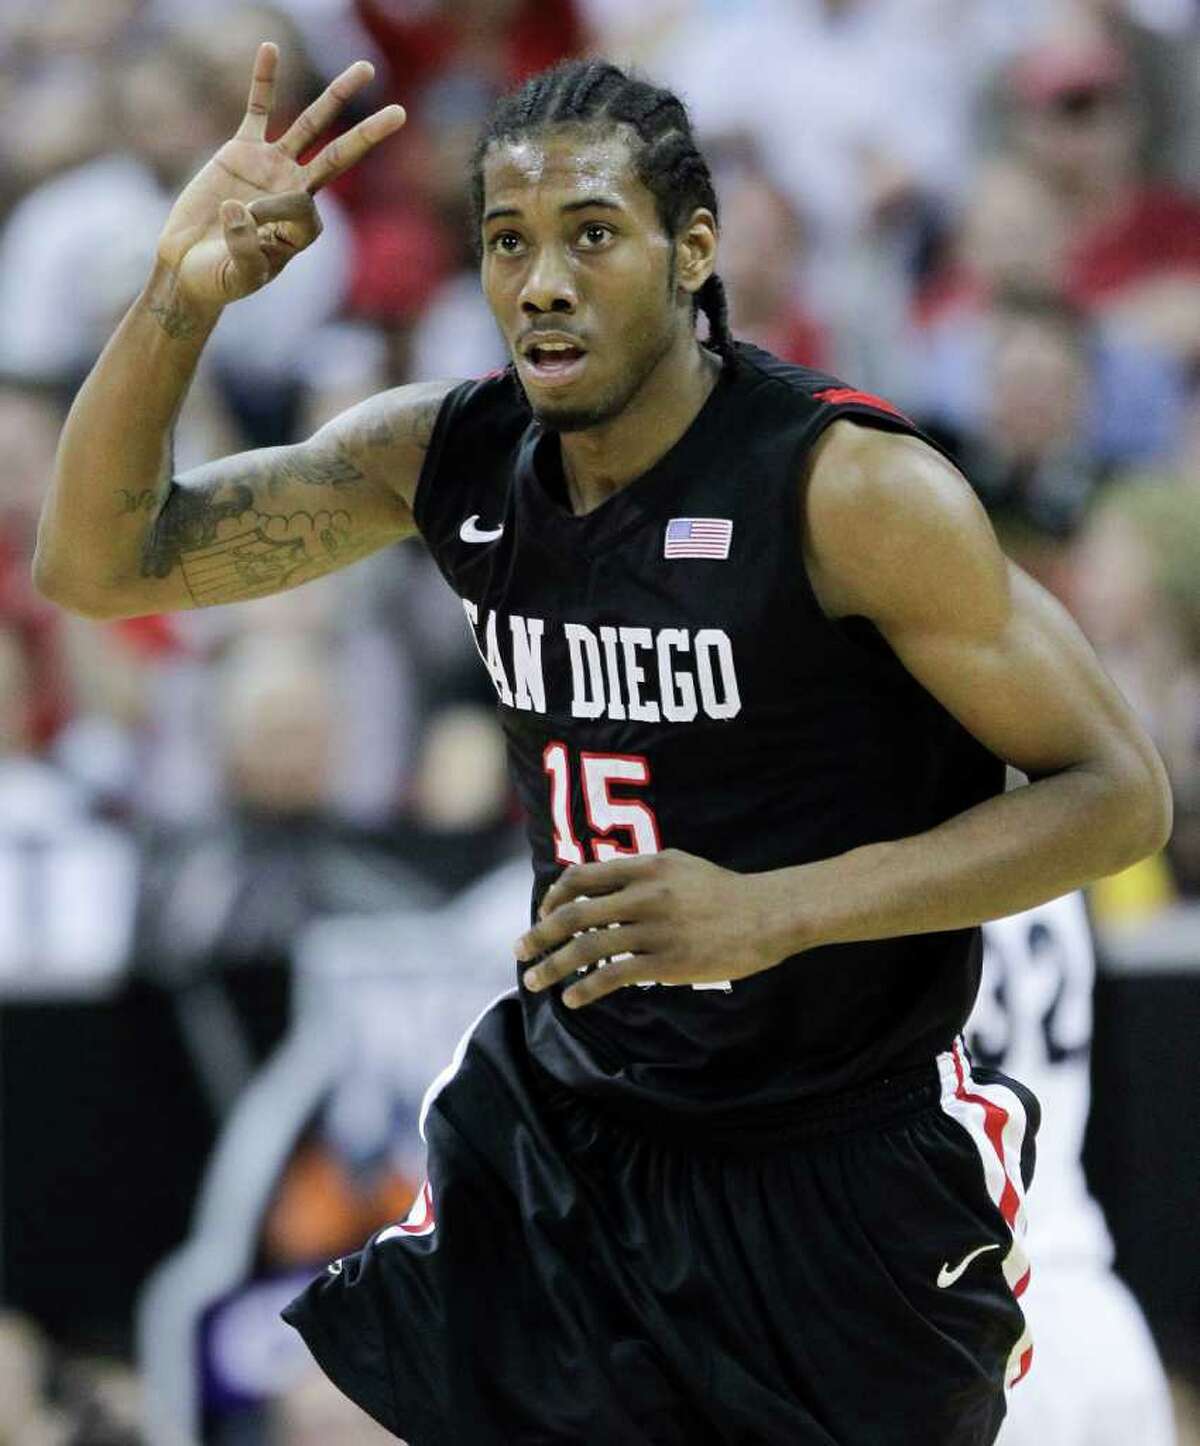 San Diego State's Kawhi Leonard gestures after hitting a three-point basket during the first half of an NCAA college basketball championship game against BYU in the Mountain West Conference tournament, Saturday, March 12, 2011, in Las Vegas. San Diego State won 72-54.